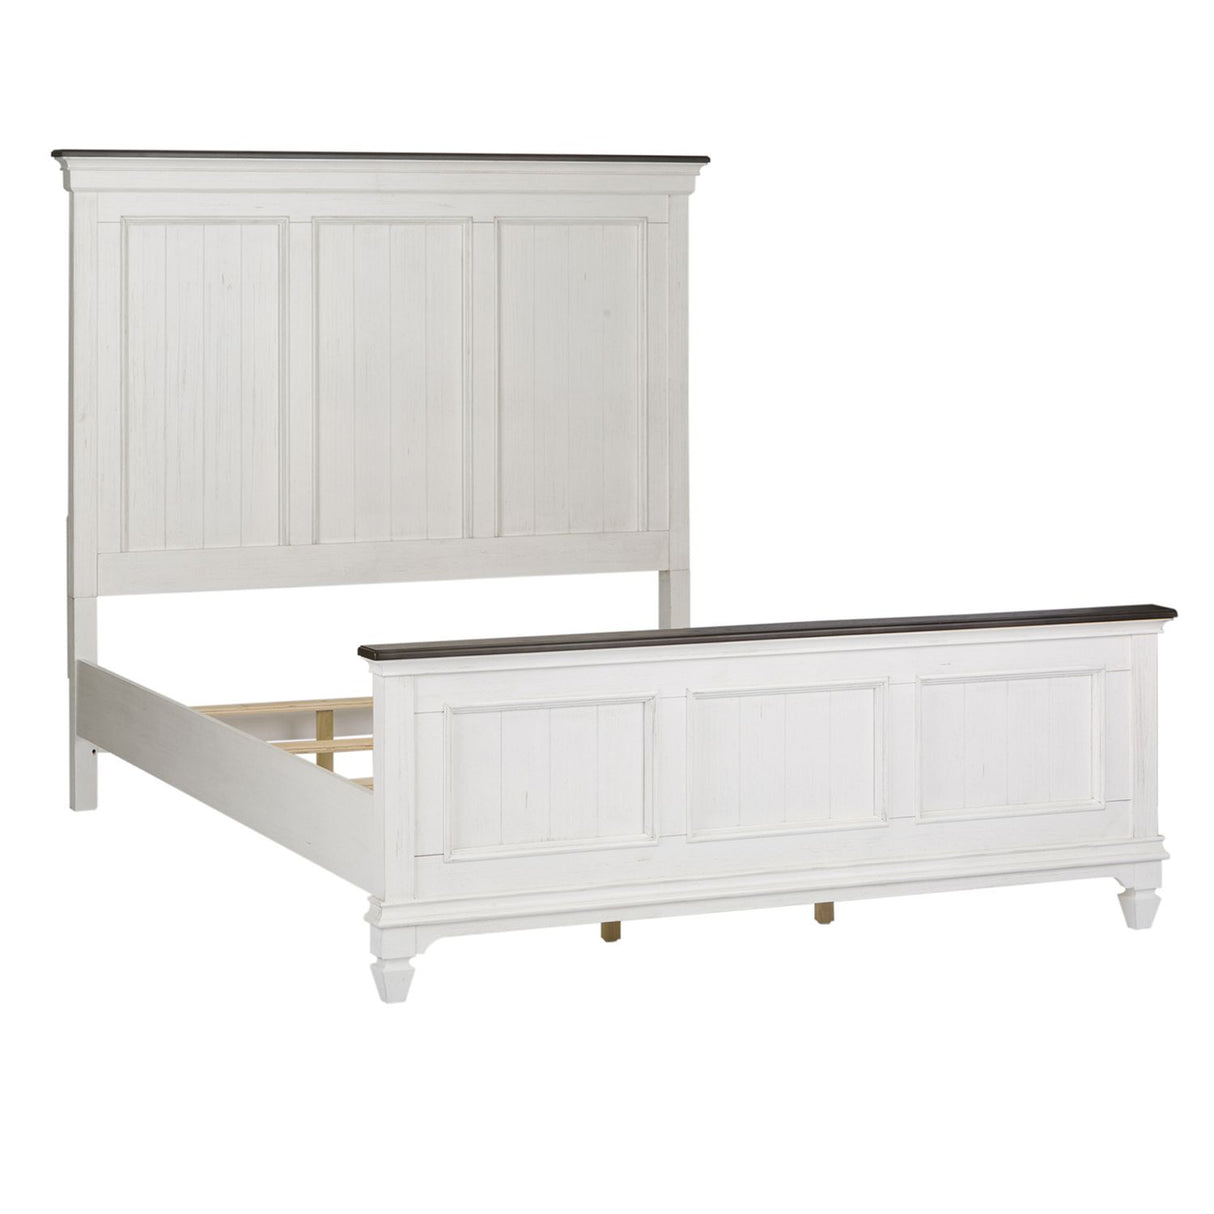 Allyson Park Queen Paneled Bed